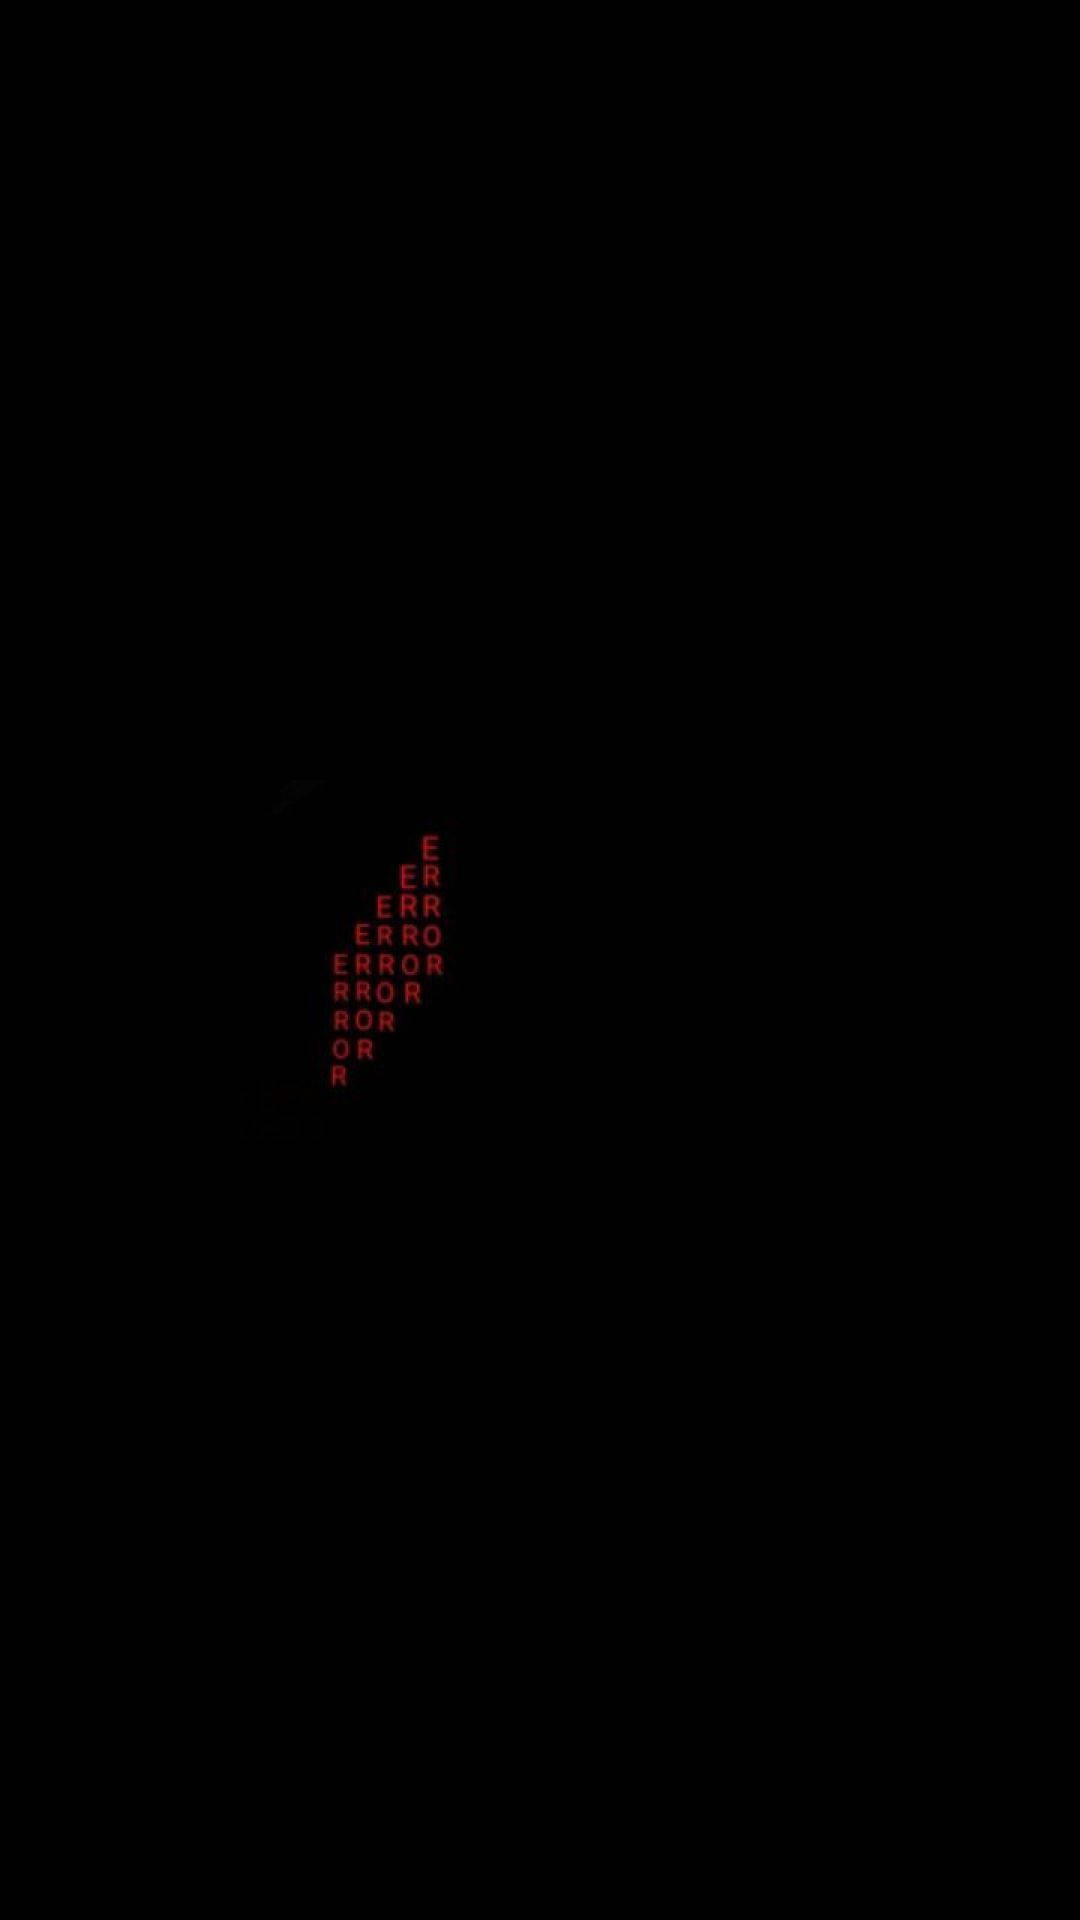 Red And Black Aesthetic Error Wallpaper